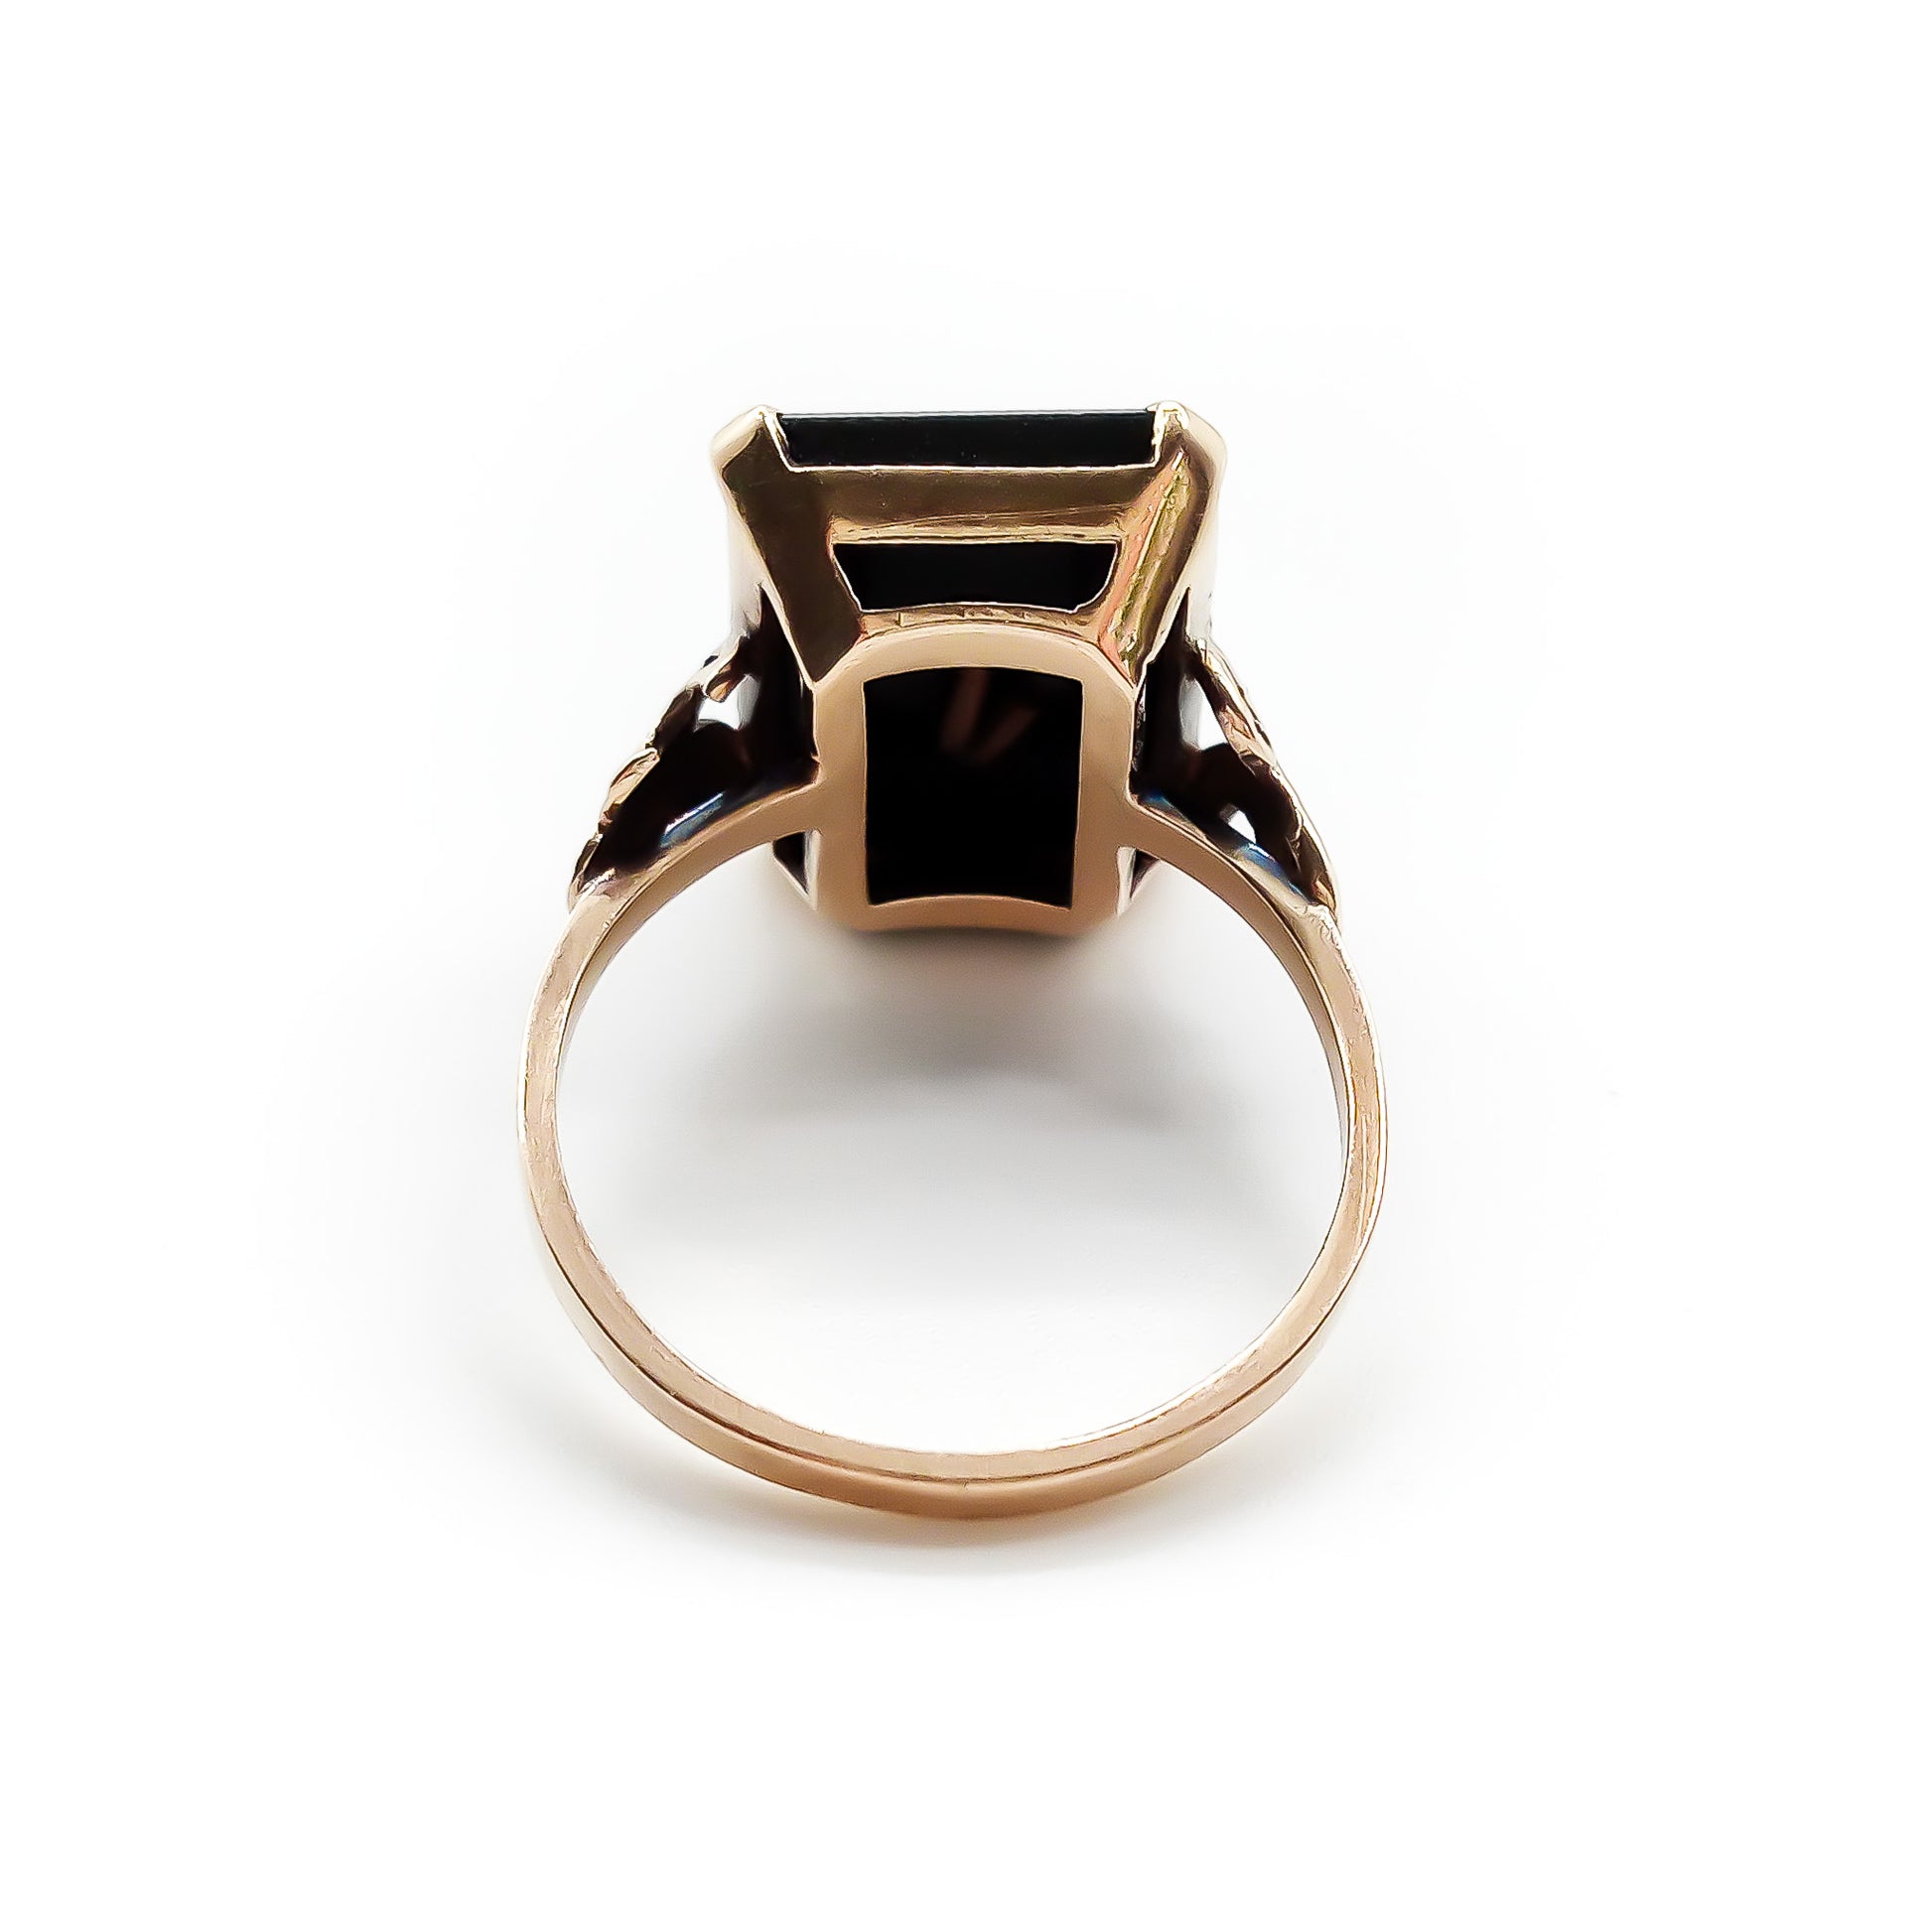 Charming 9ct rose gold and onyx signet ring with a fancy script letter “P”. Circa 1930’s